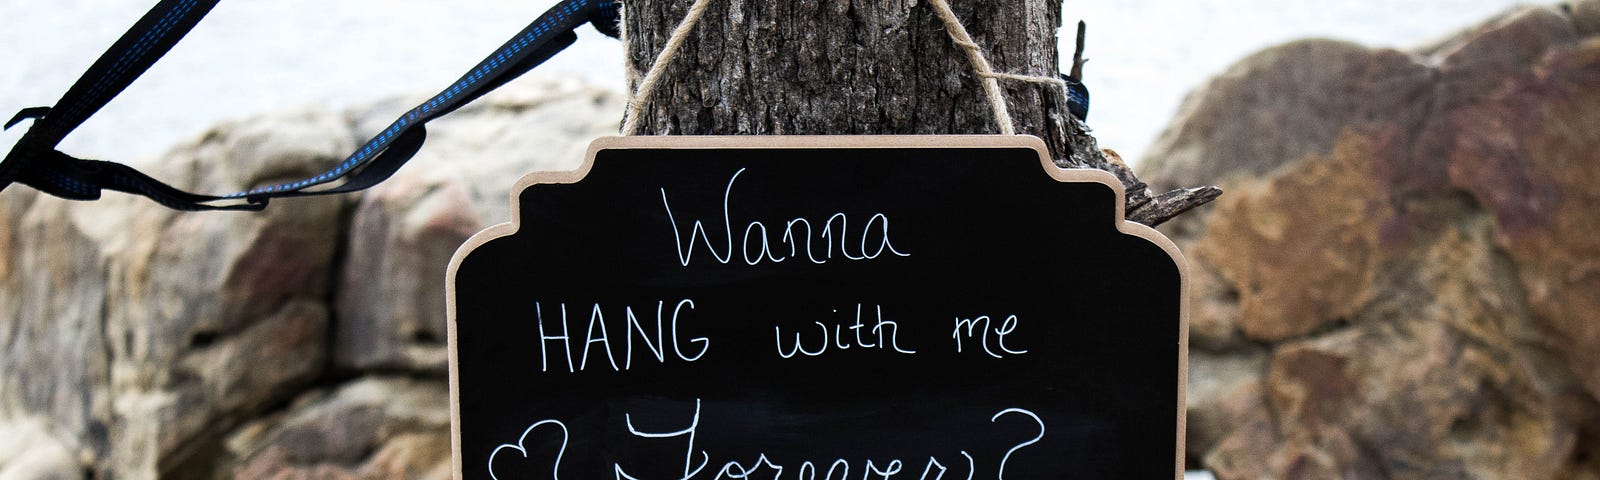 Sign saying “Want to hang with me forever” as a word play on breasts. Breasts. Bras. Women’s Health.